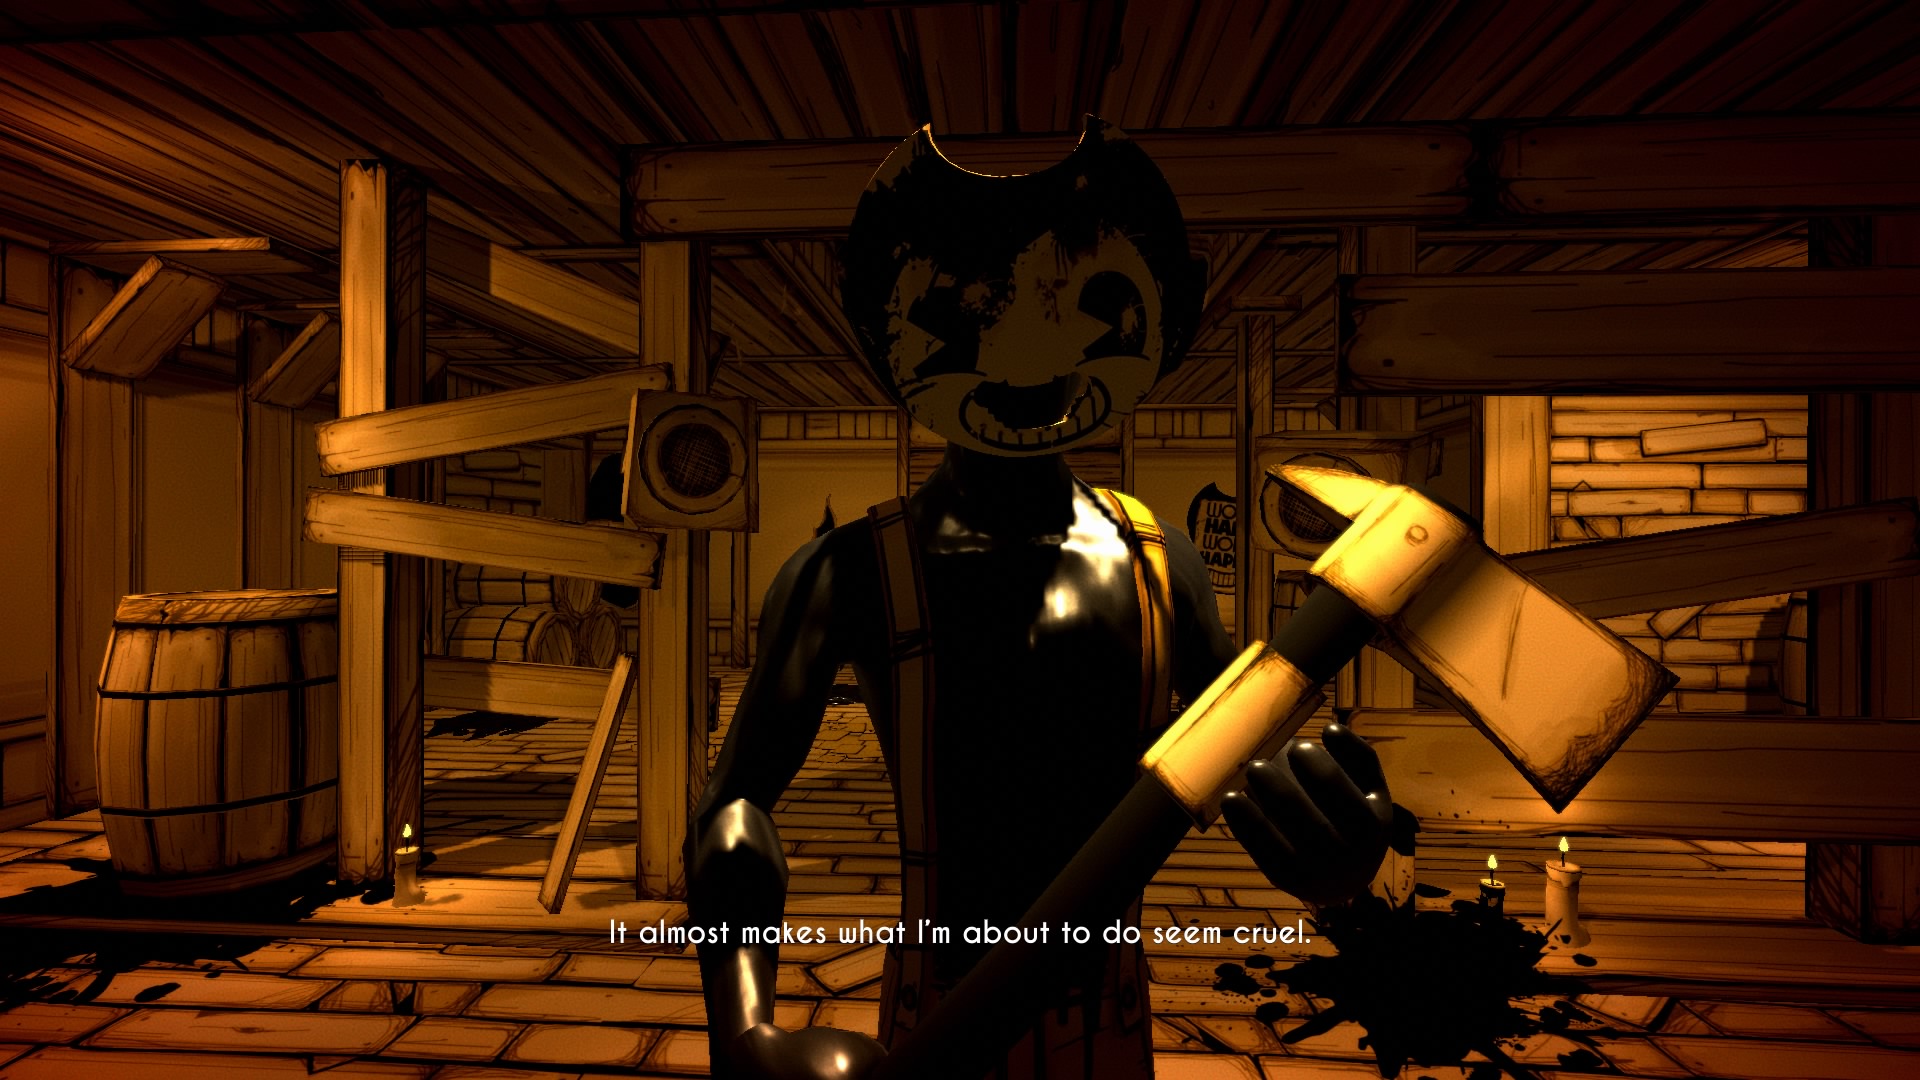 How long is Bendy and the Ink Machine?